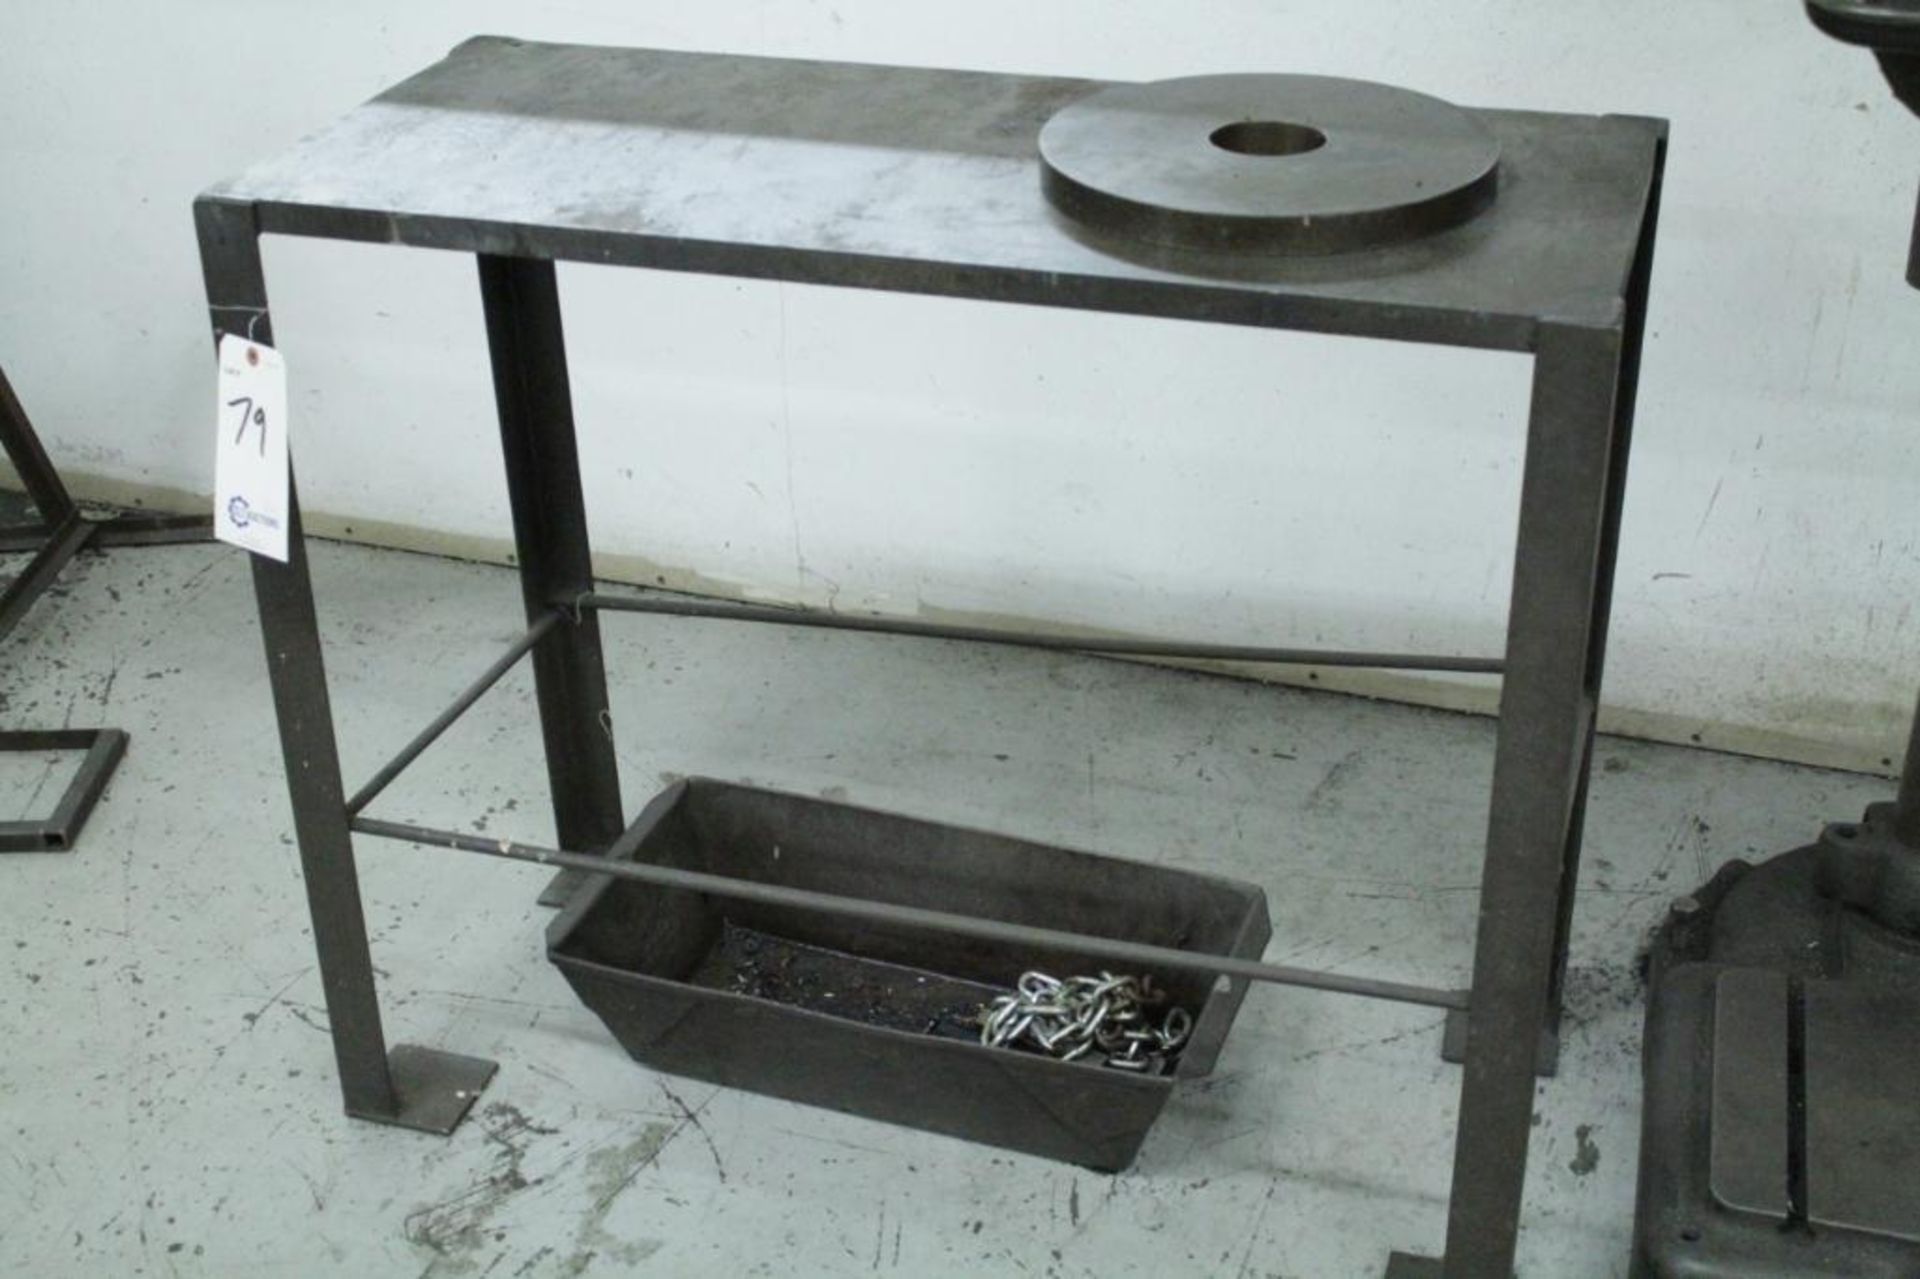 Steel table 39" x 17" x 33" 1" plate top